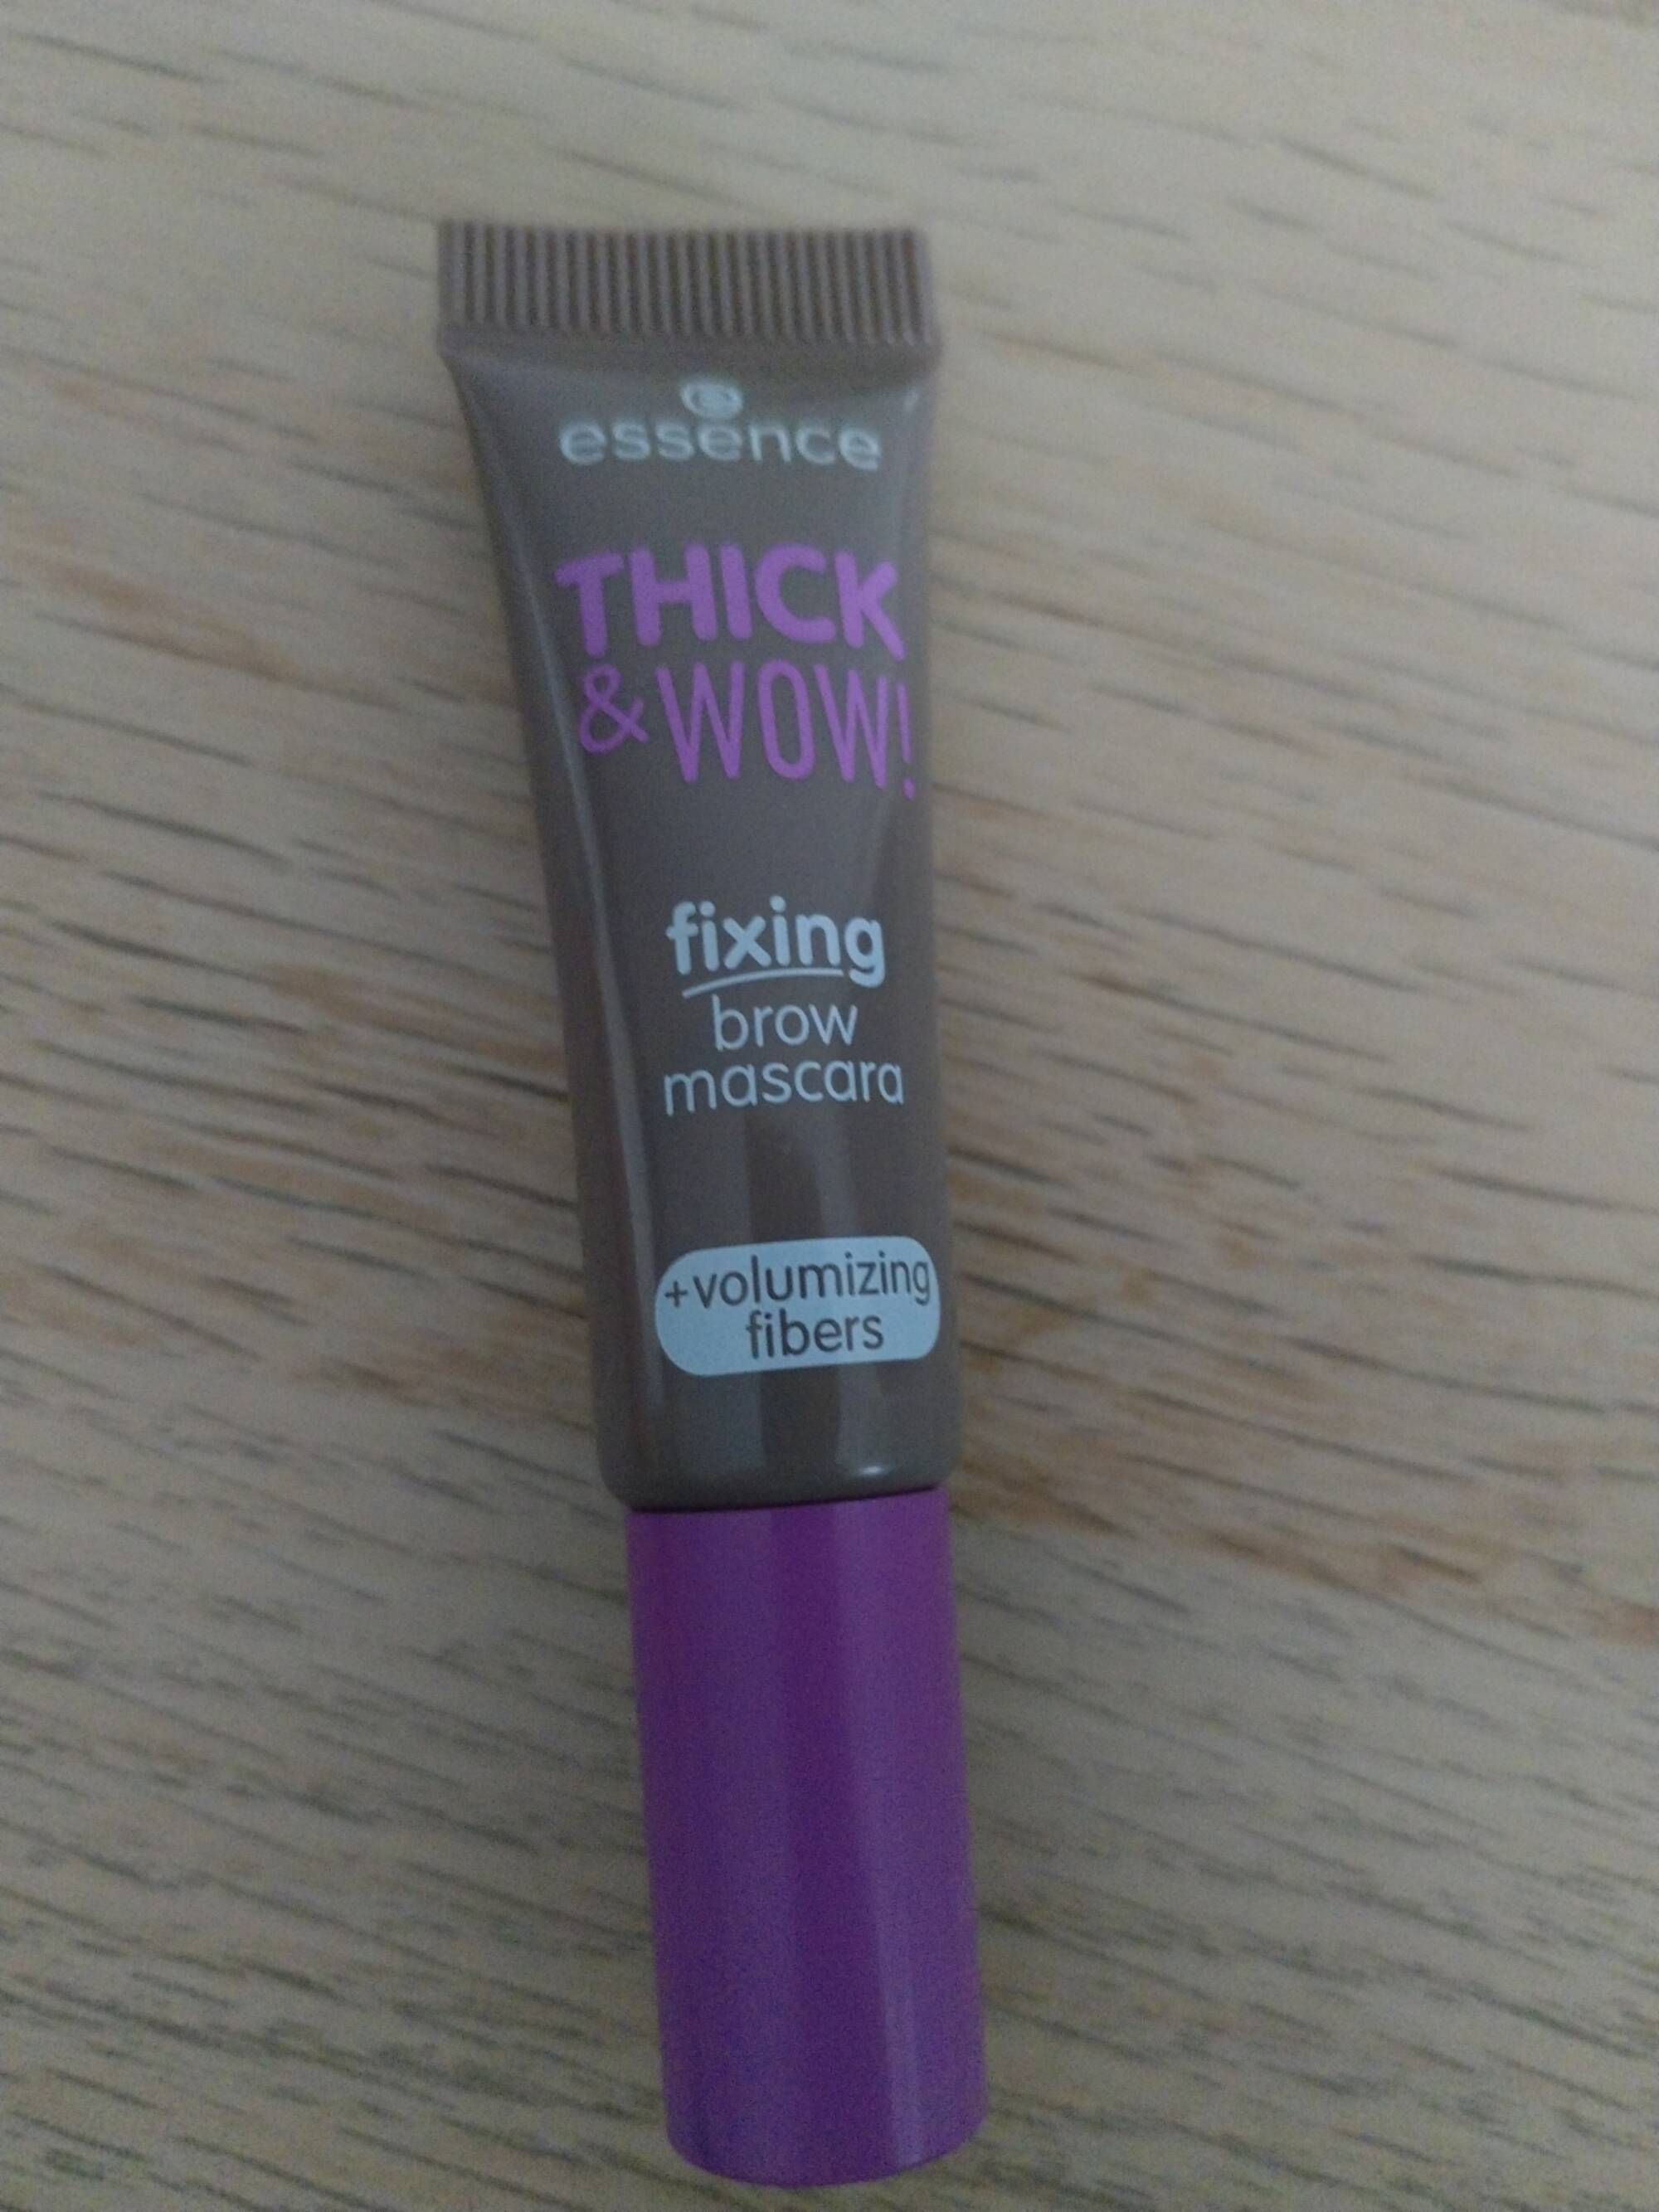 ESSENCE - Thick & wow - Fixing brow mascara